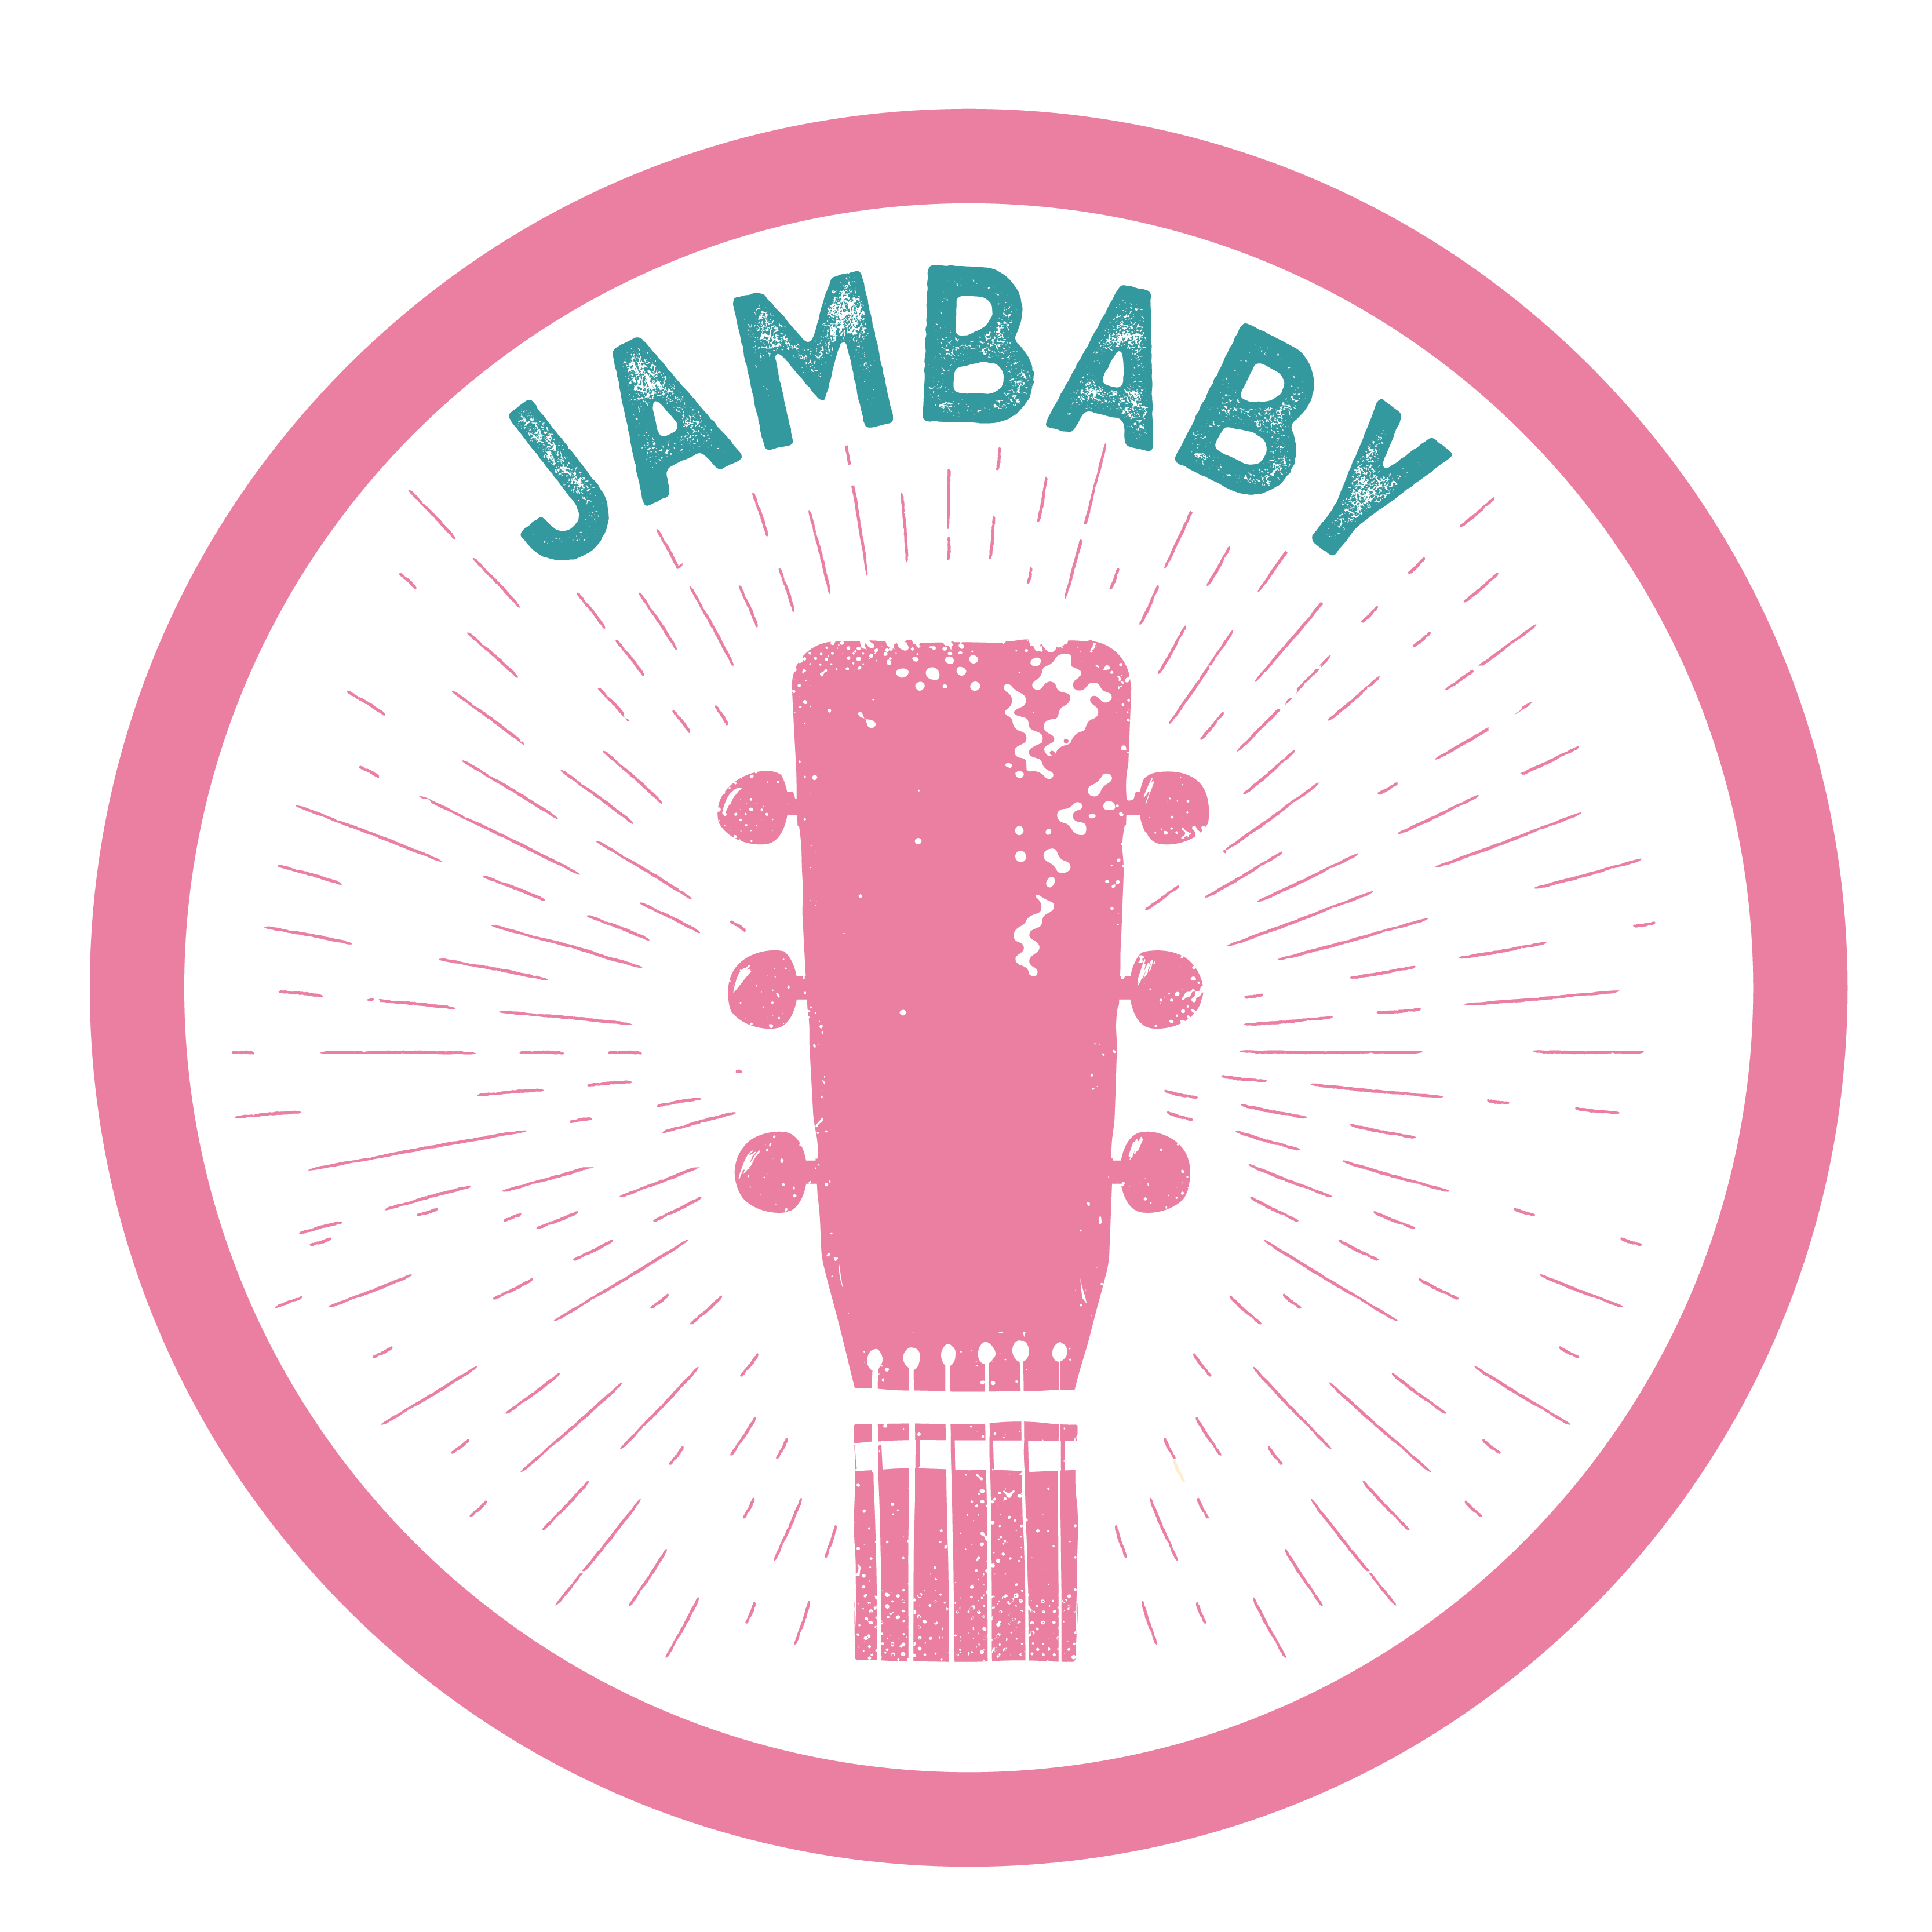 JamBABY is a virtual music class for children from 6 months to 7 years.